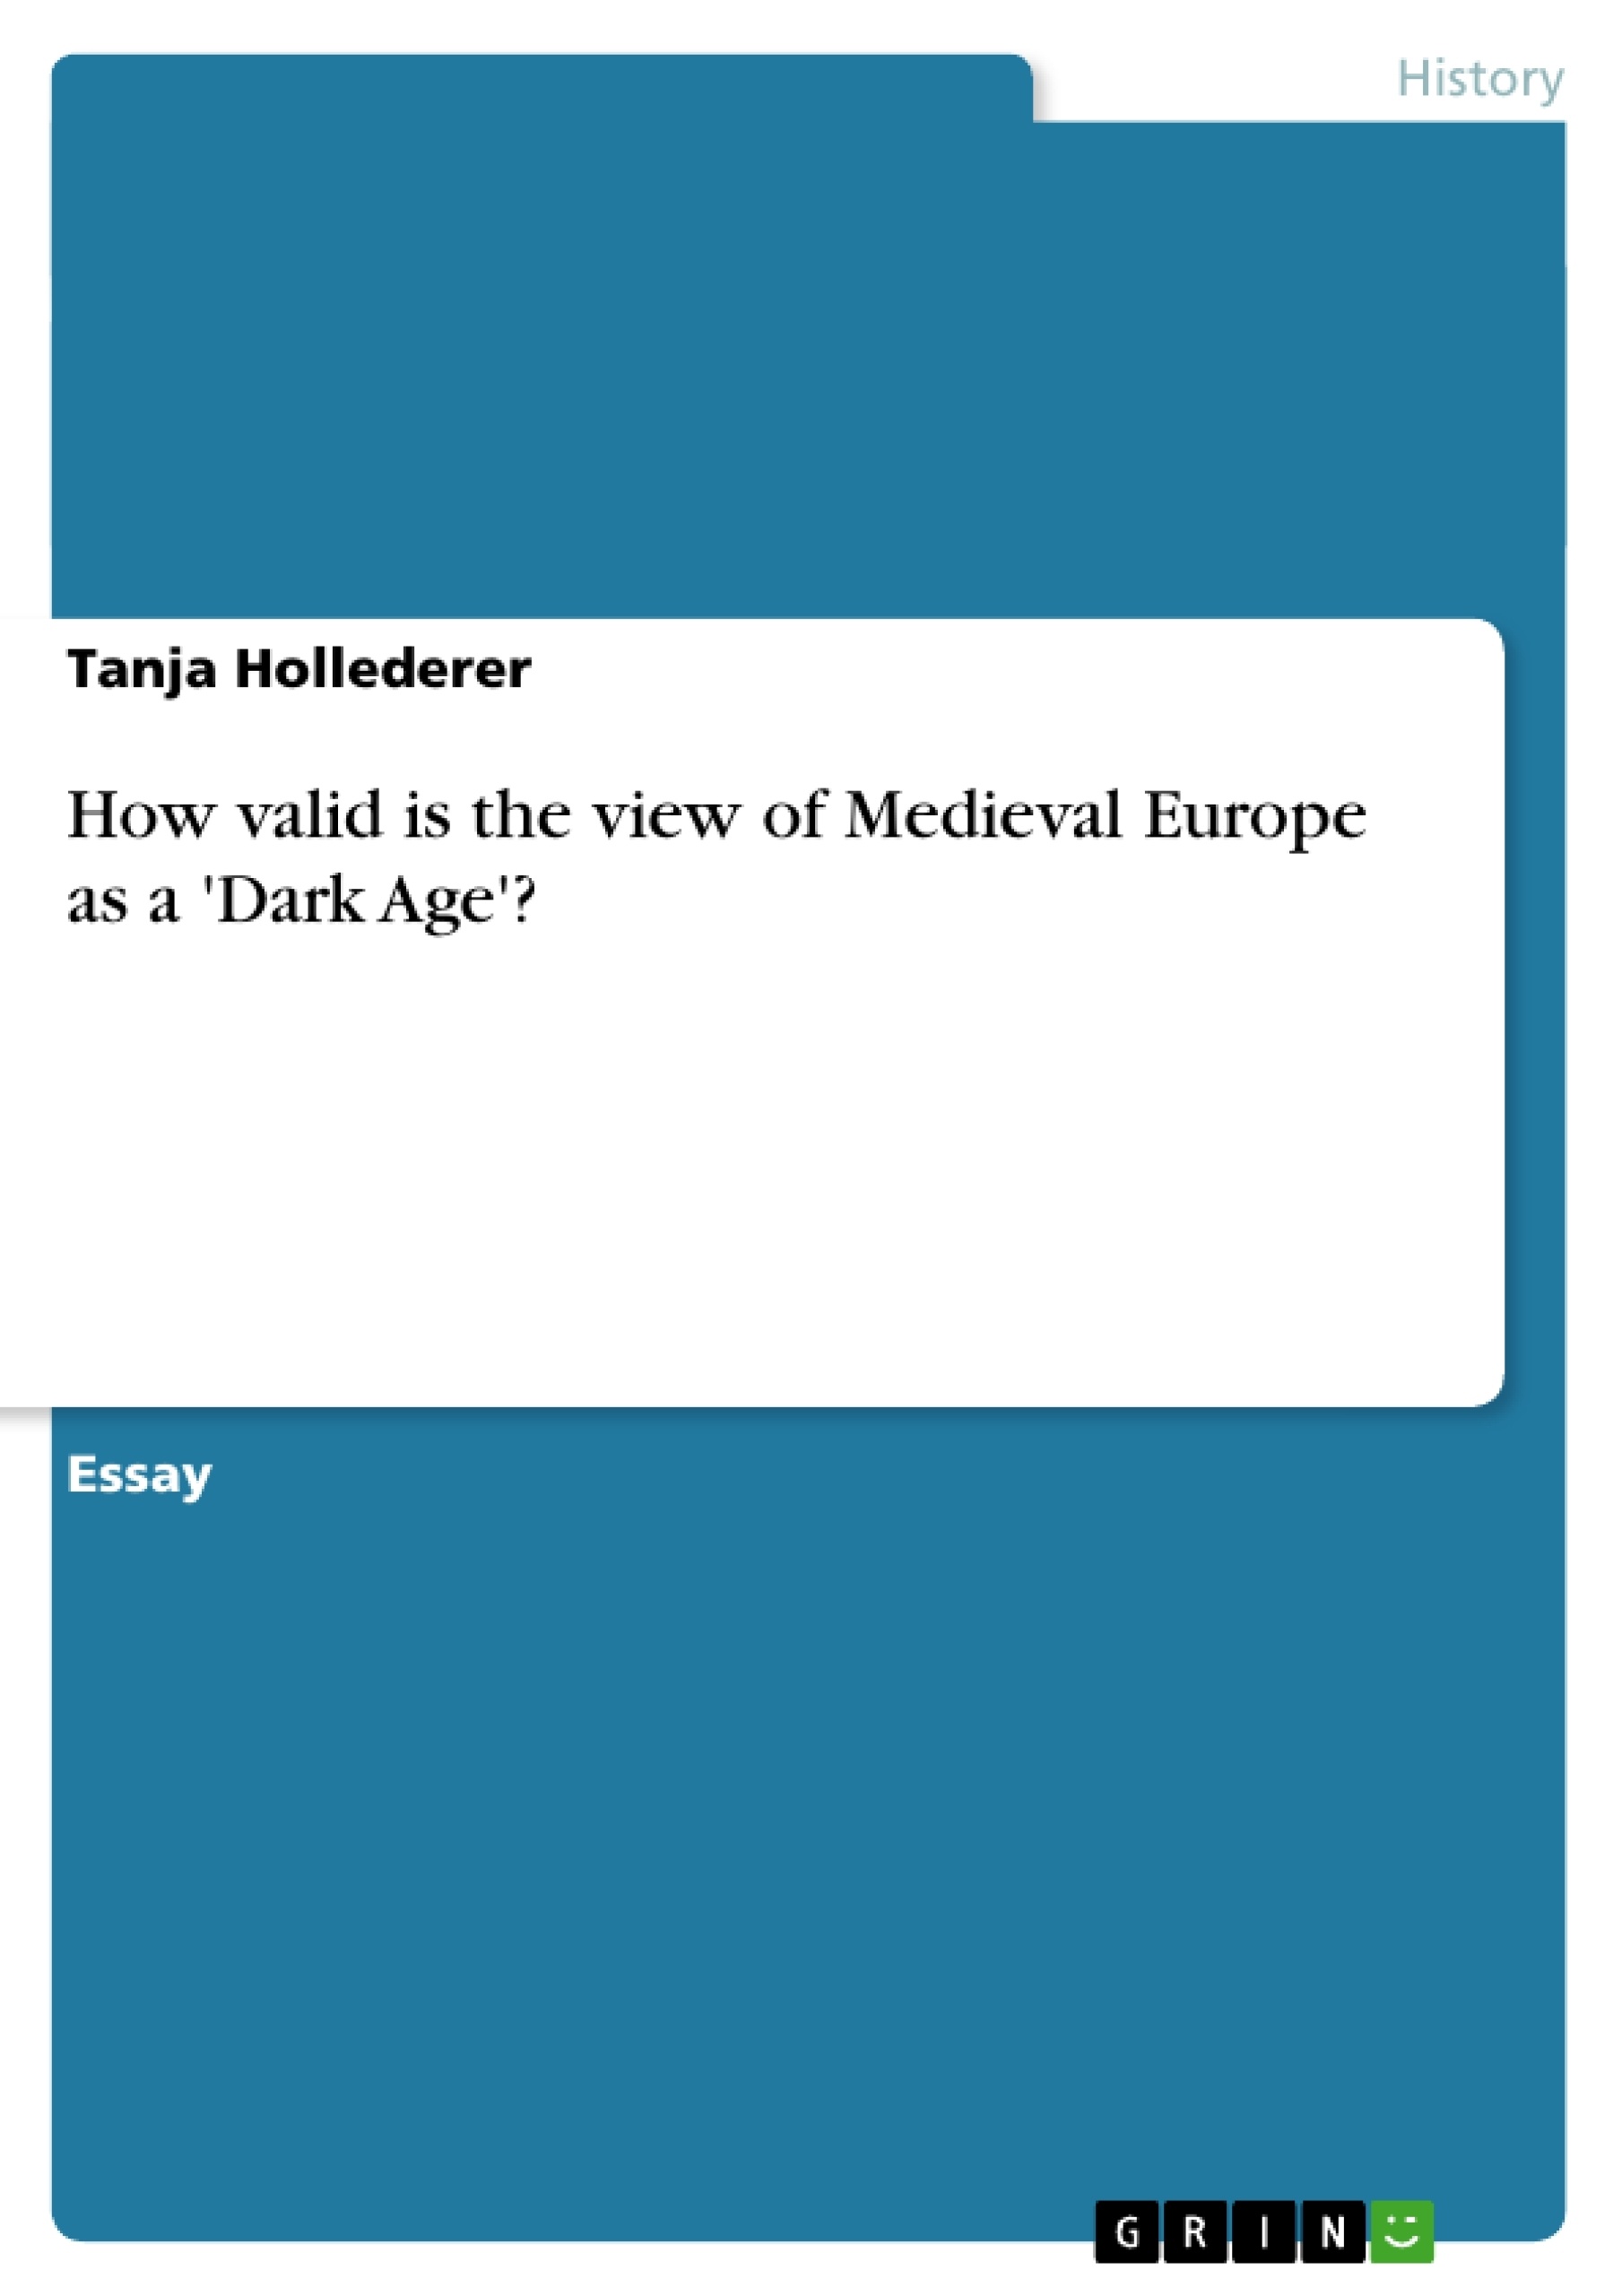 Título: How valid is the view of Medieval Europe as a 'Dark Age'?